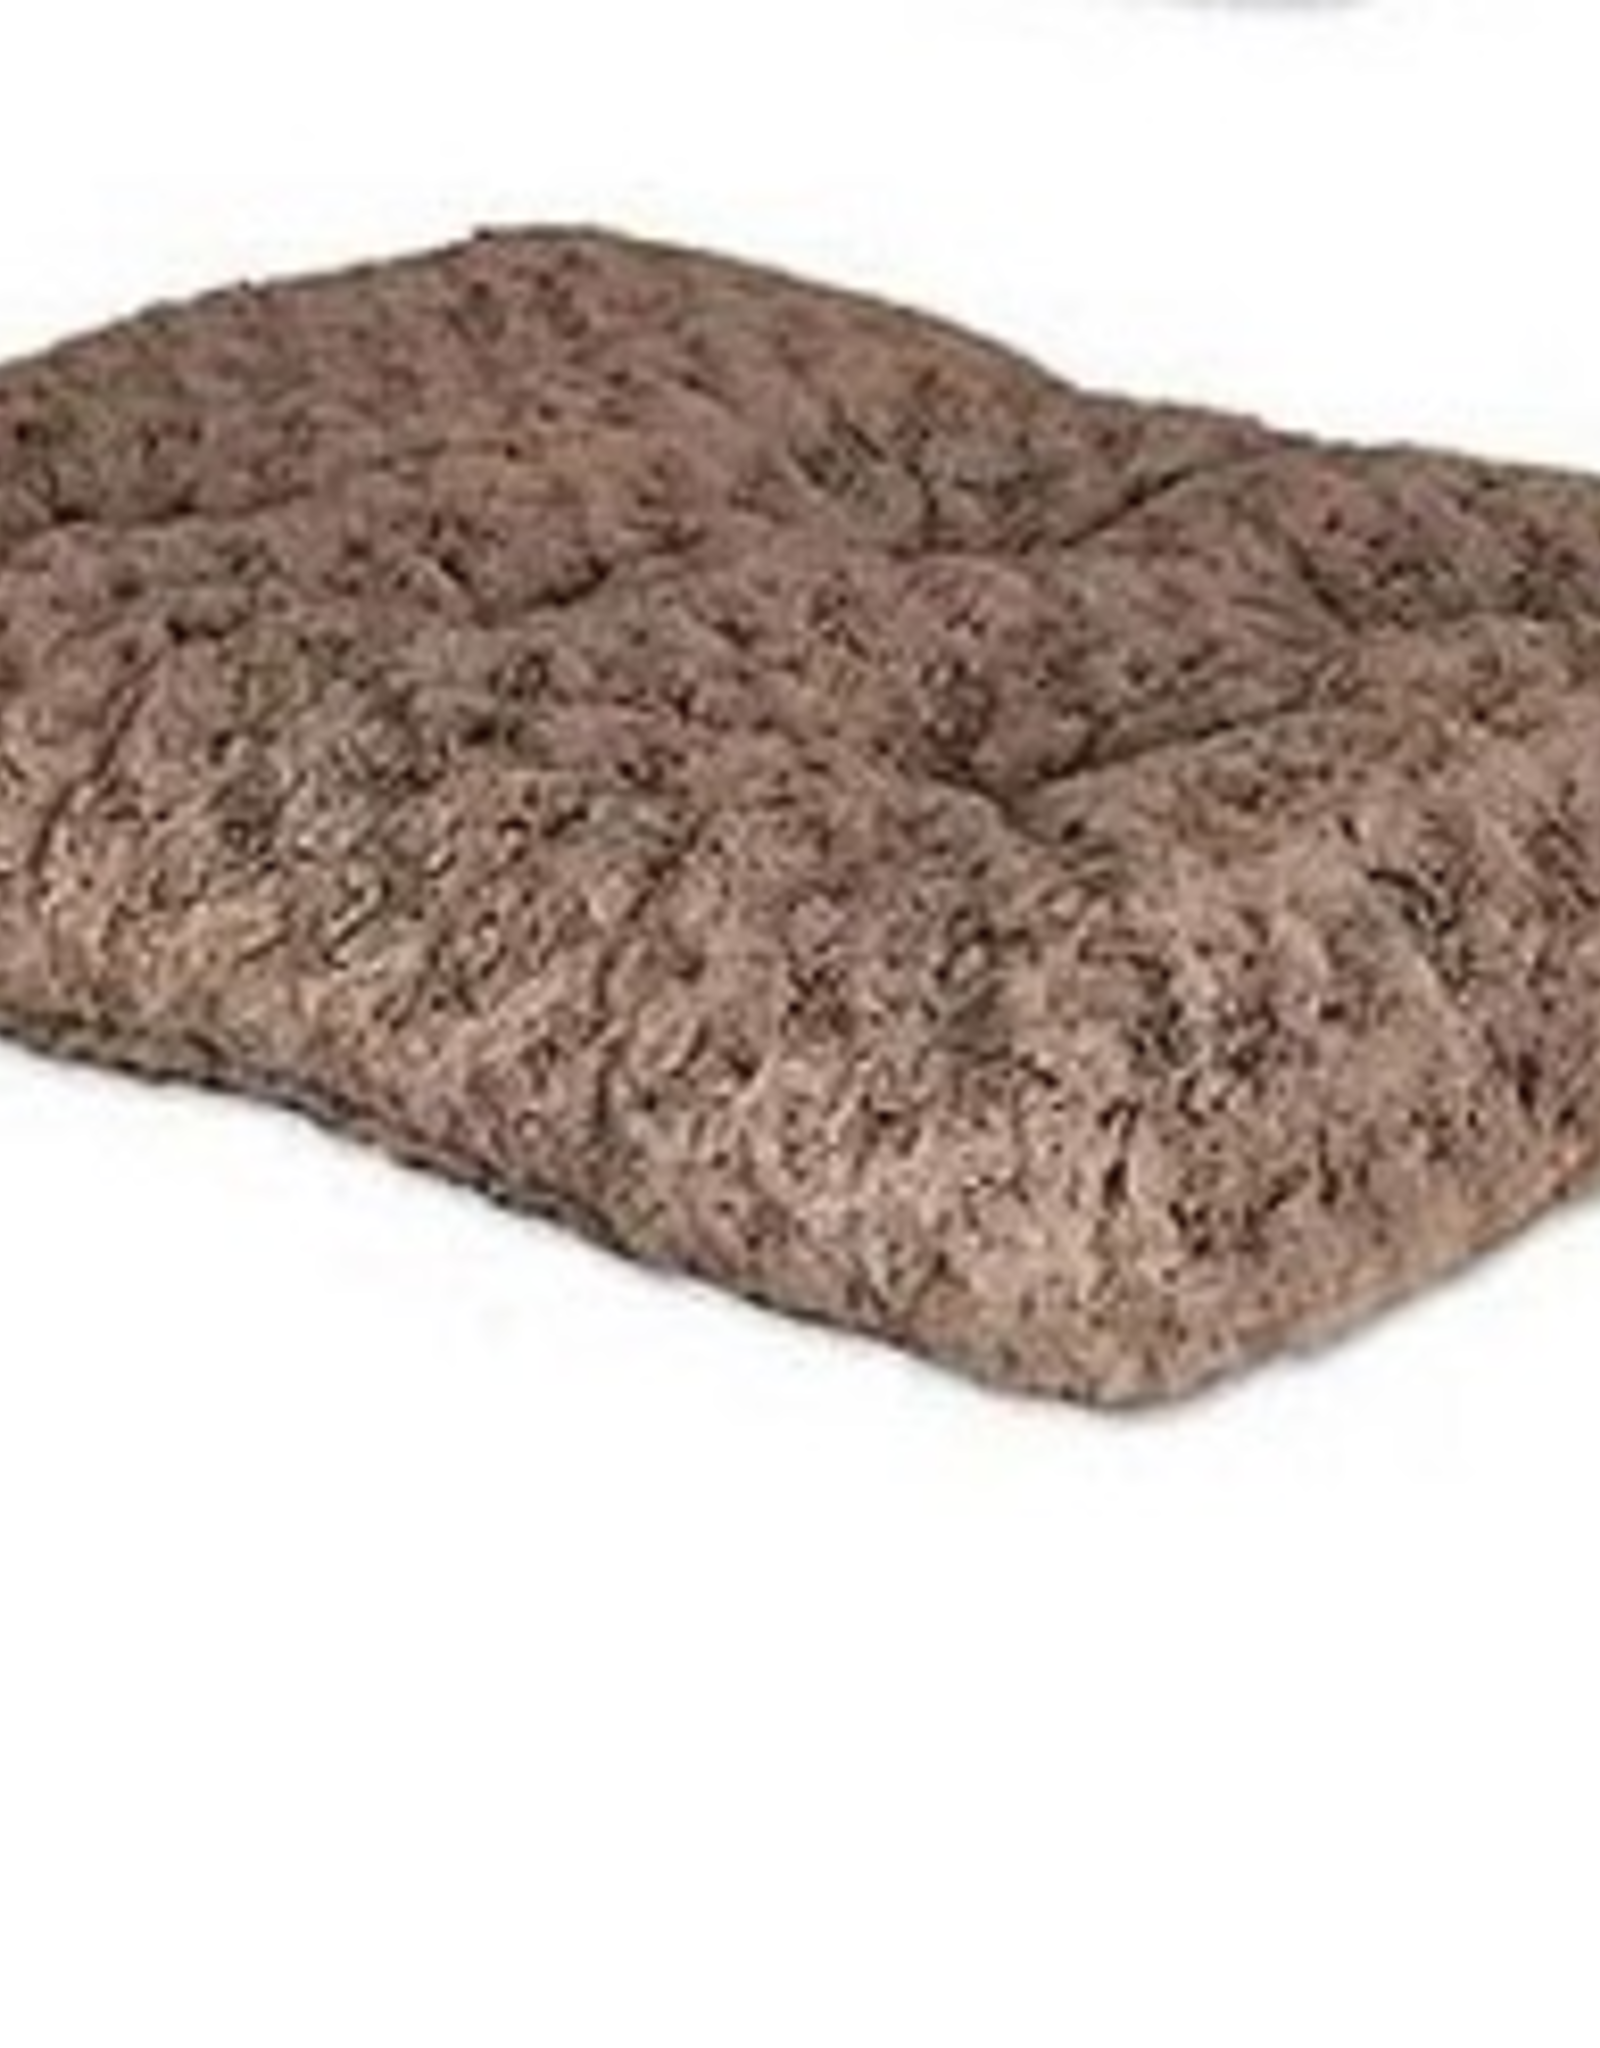 MIDWEST PET PRODUCTS BED QUIET TIME OMBRE SWIRL 21X12